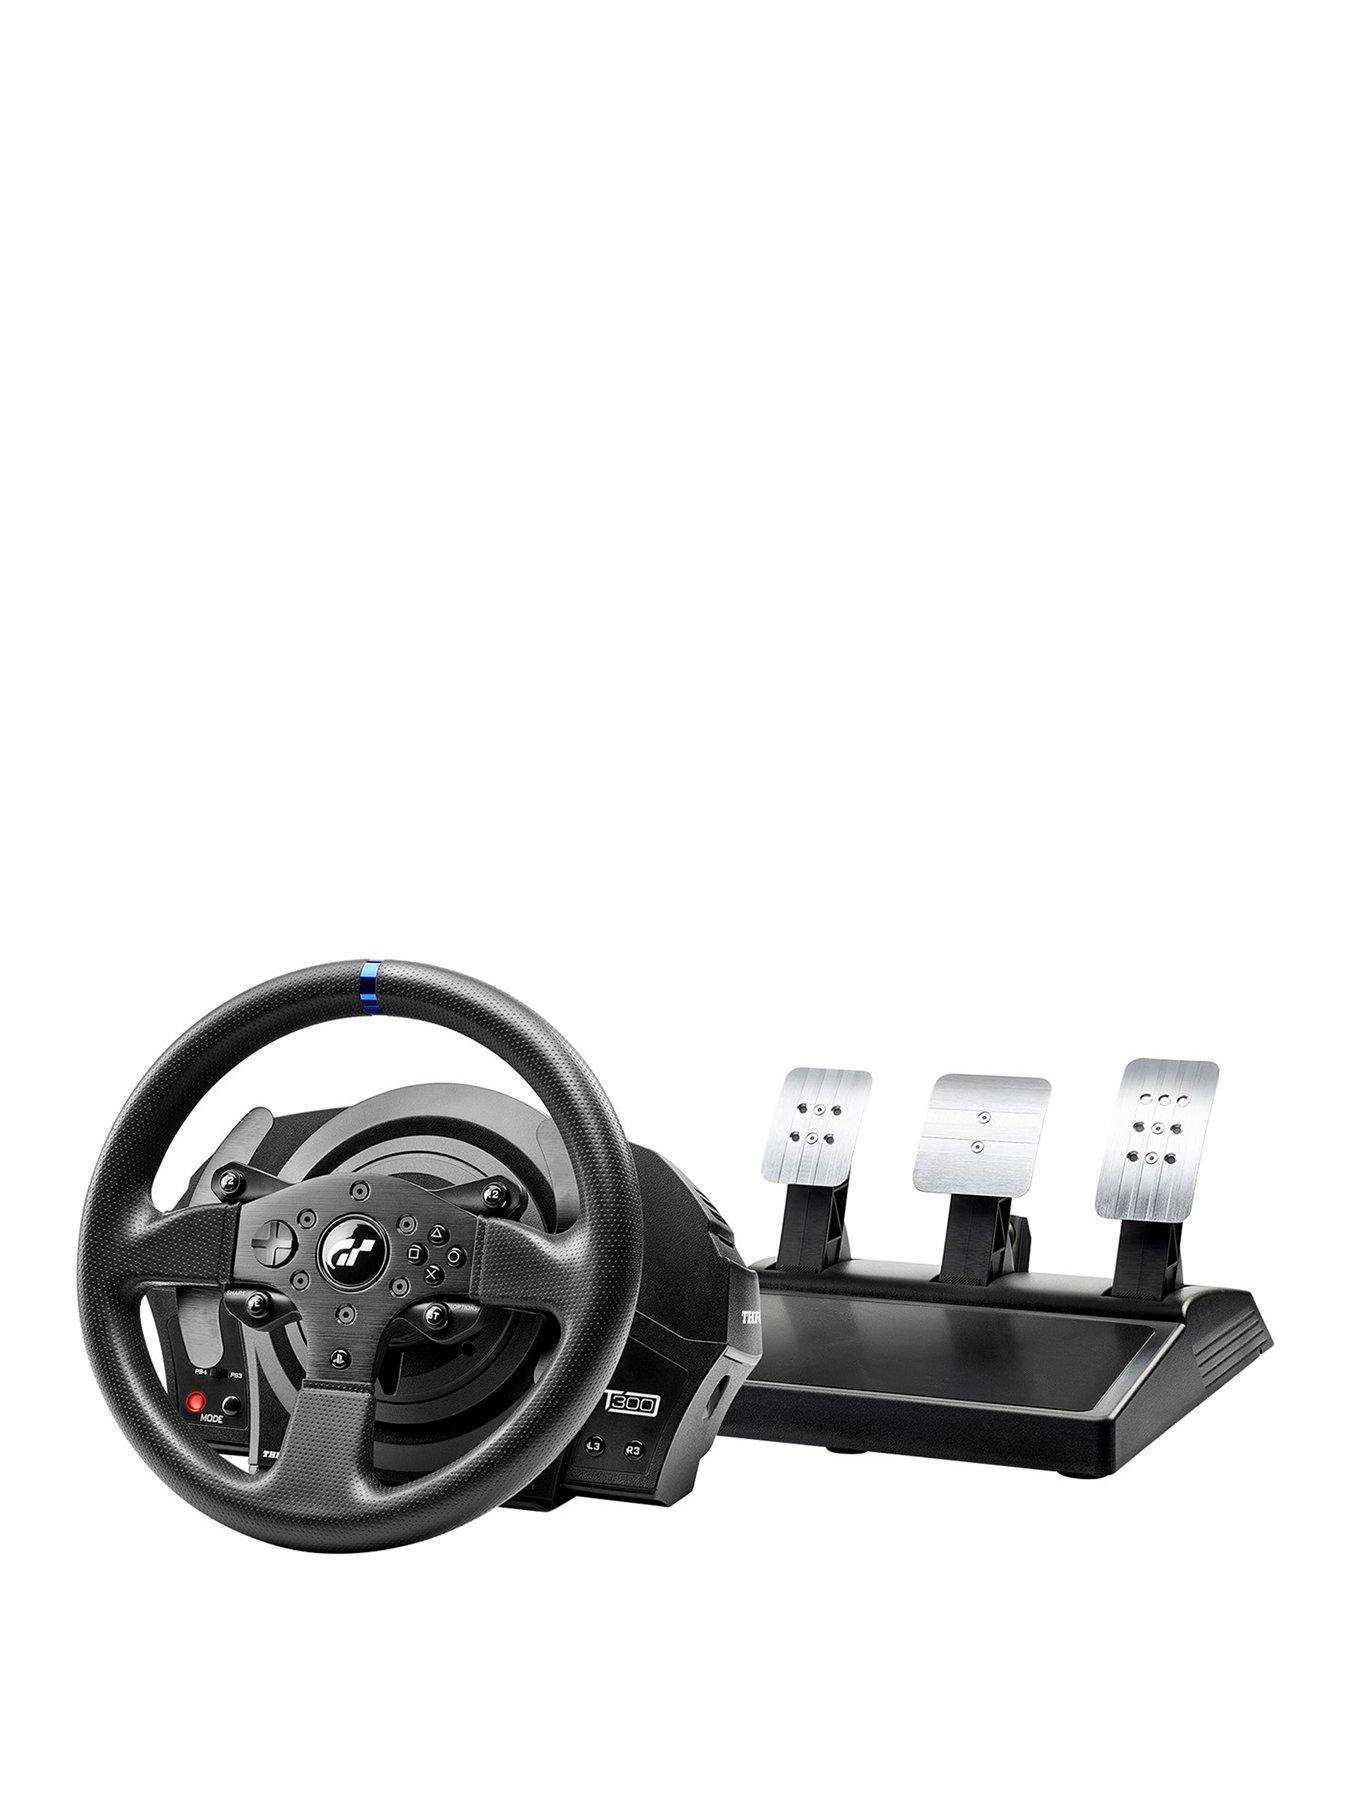 Thrustmaster T300 RS GT Force Feedback Racing Wheel - Officially